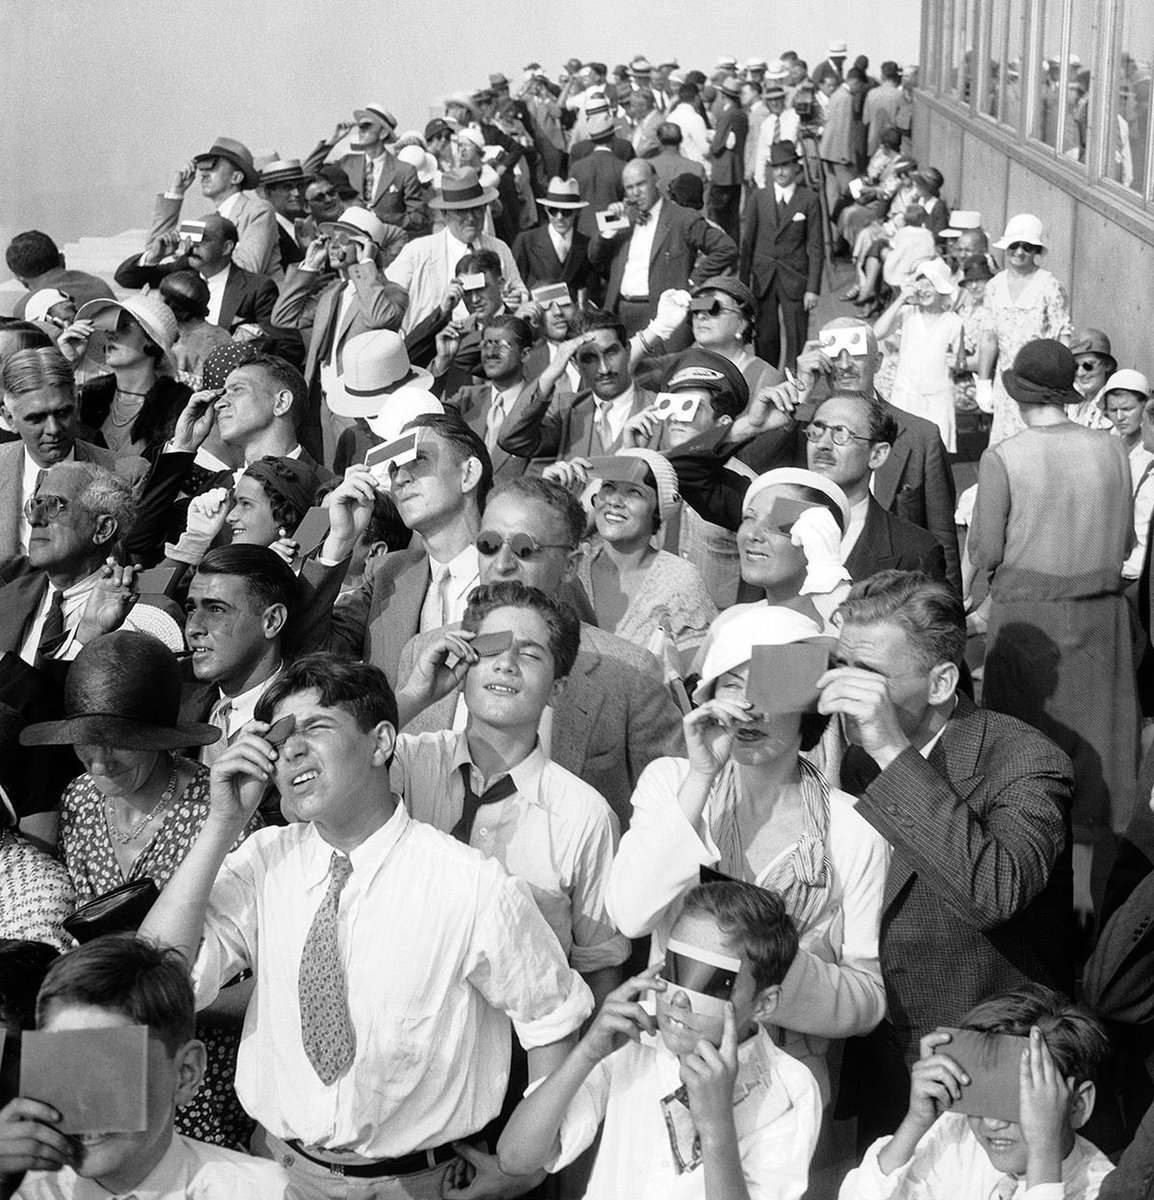 Eclipse watchers at the Empire State Building, New York, 1932. #SolarEclipse